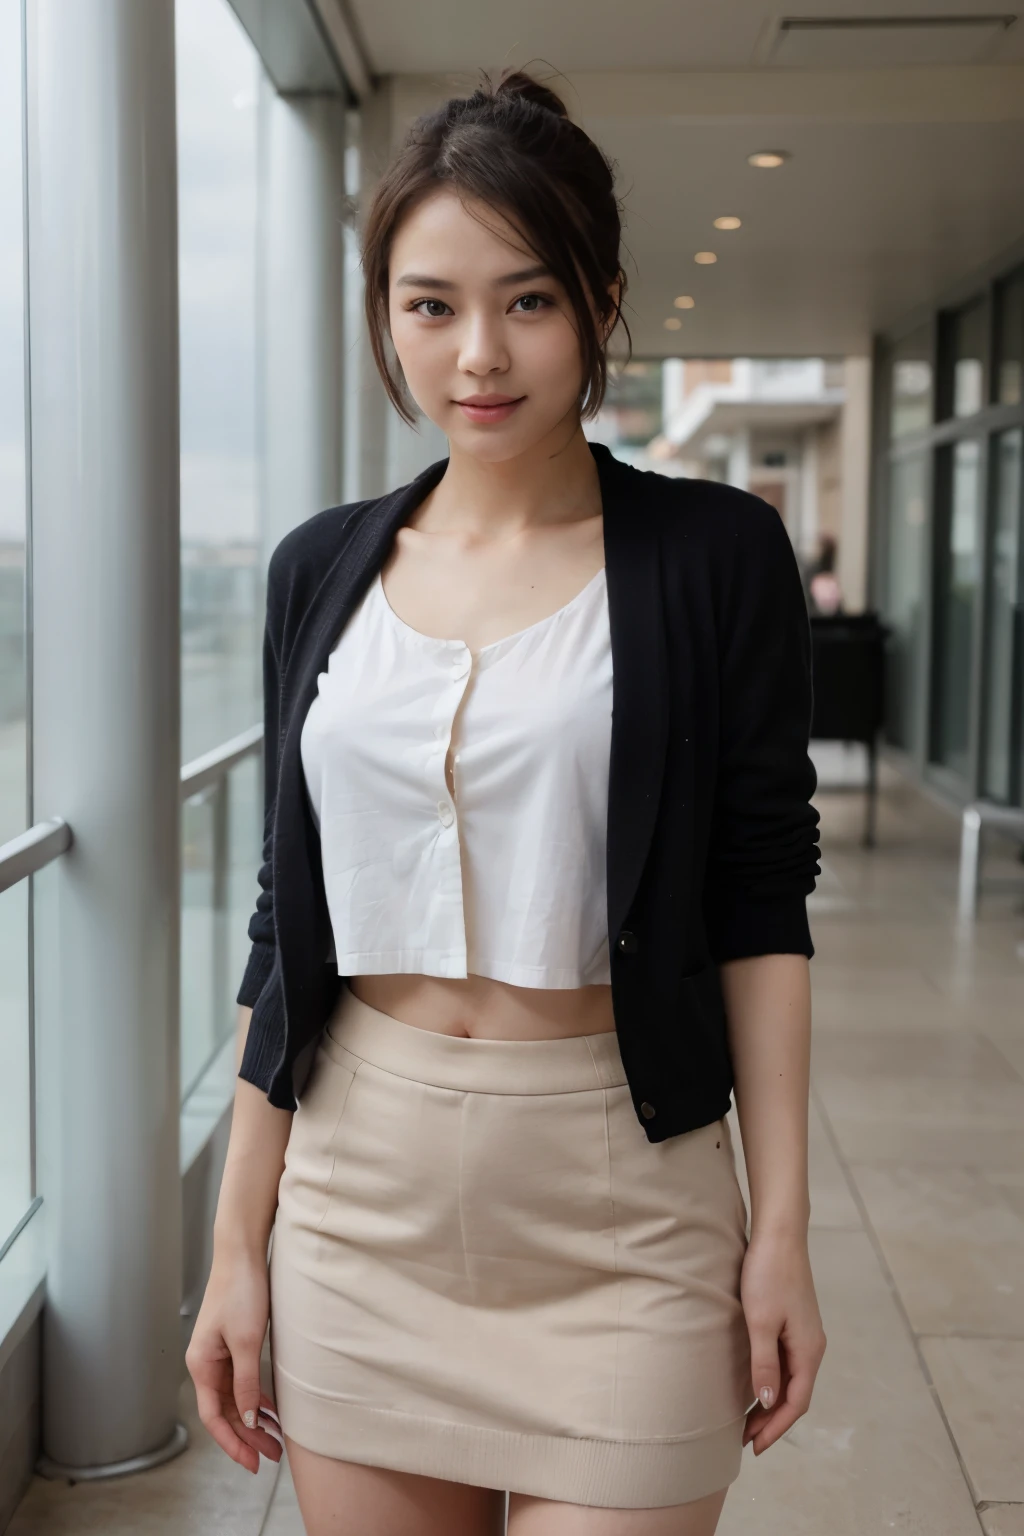 top-quality、​masterpiece、超A high resolution、(realisitic:1.4)、Beautuful Women１、Beautiful detail eyes and skin、smile、Light brown short-cut hair, business suit and shirt, gorgeous chinese model, photo of slim girl model, IG-Modell, beautiful female model, black auit, luxury office, long pants